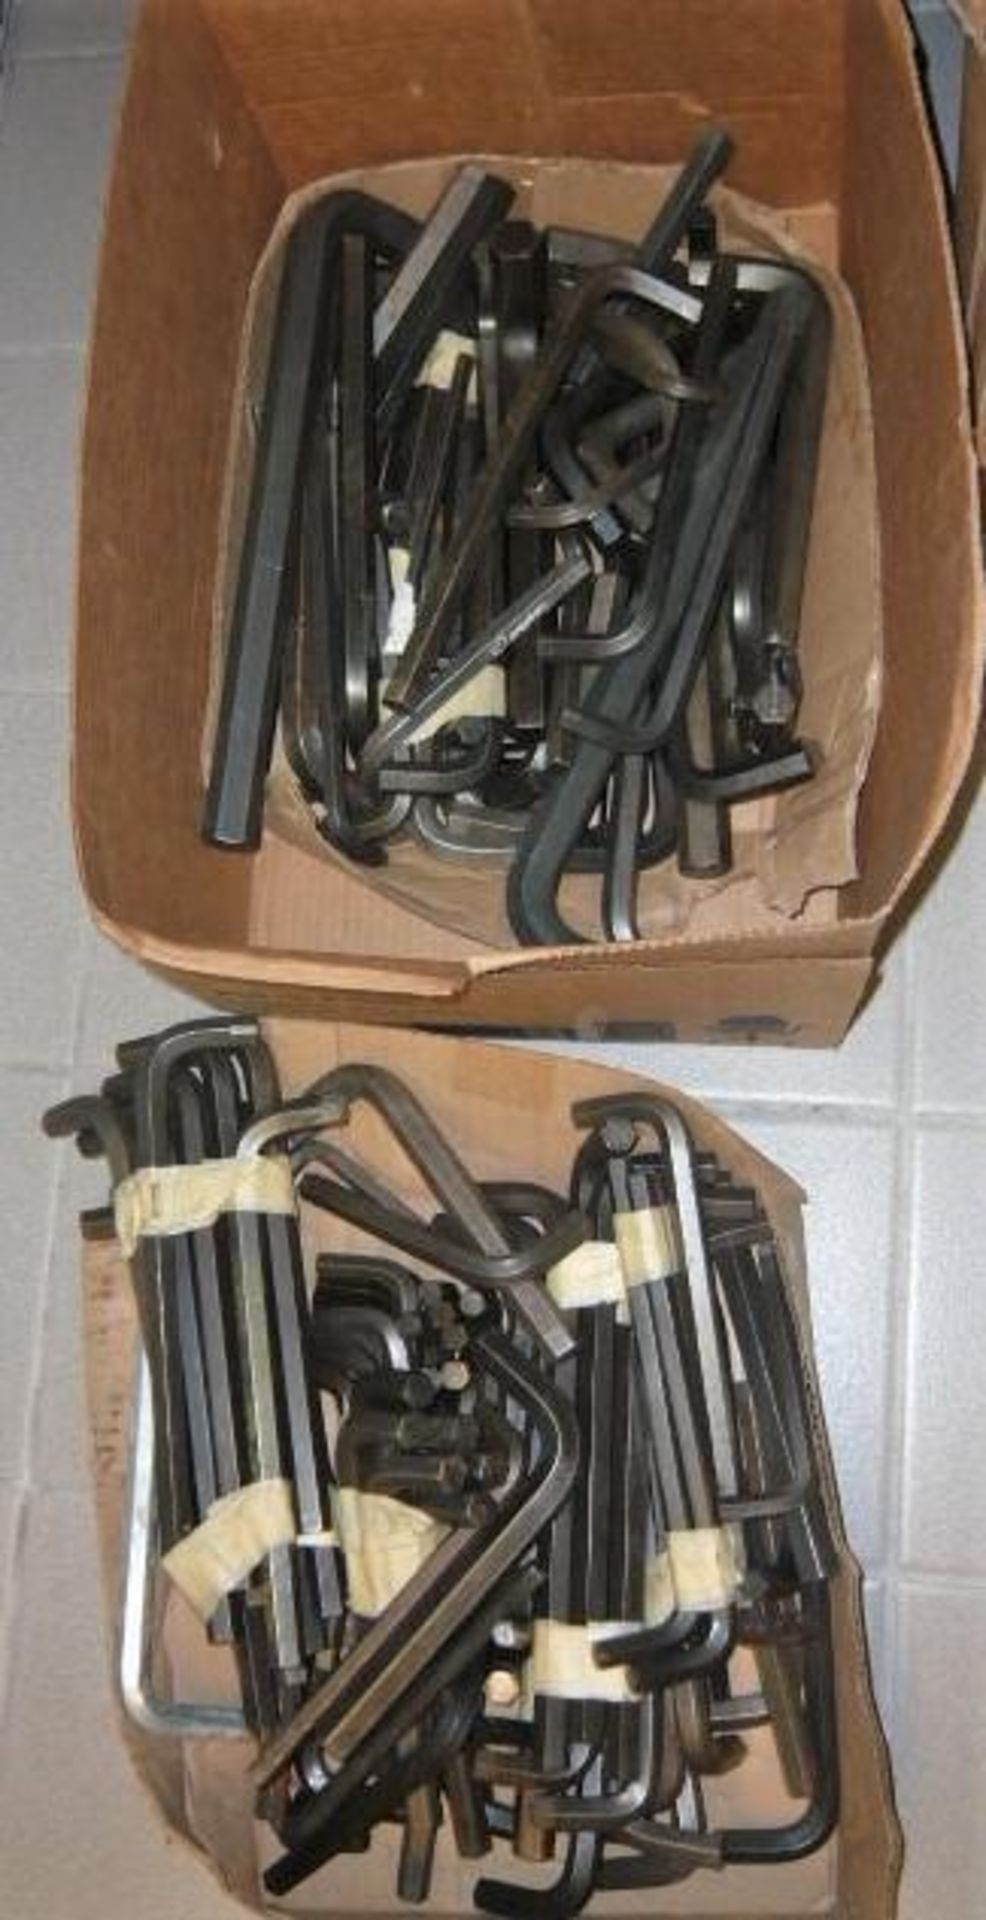 (2) BOXES OF ALLEN WRENCHES